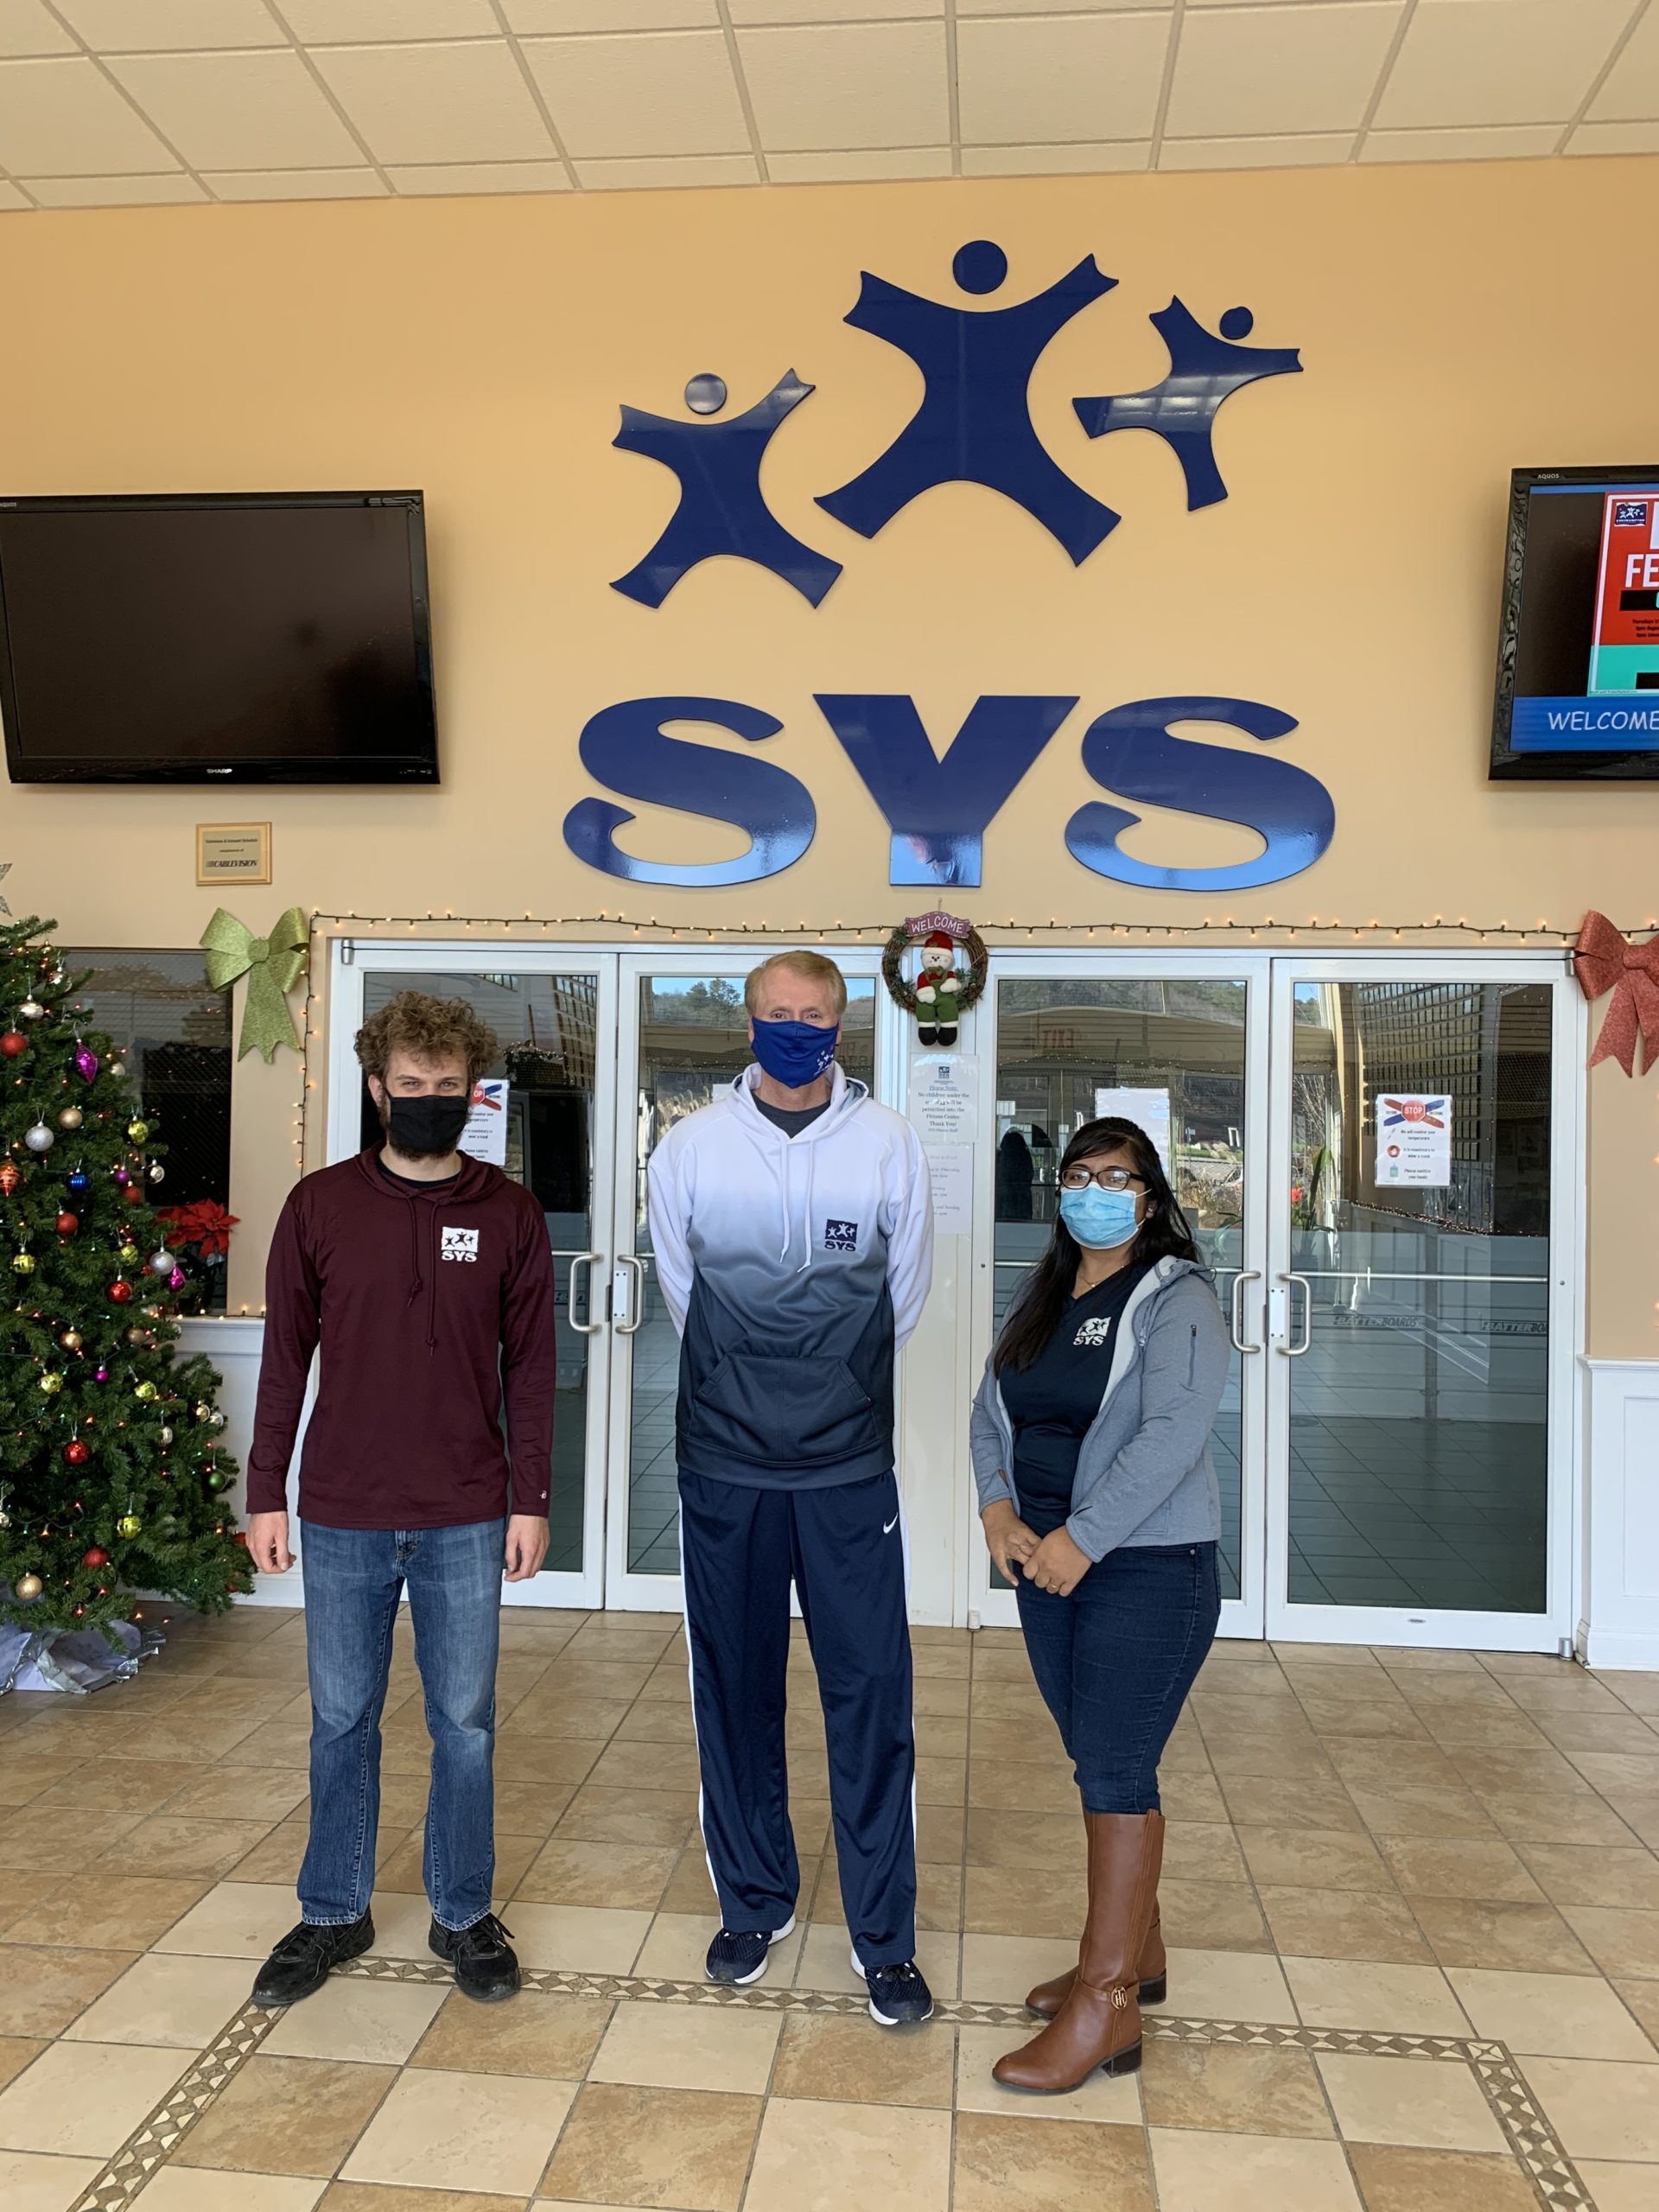 Evan Gravano, Scott Johnson, and Amairani Hernandez, staff members at Southampton Youth Services worked together to help save the life of a man who collapsed while playing pickle ball at the recreational center on November 30.